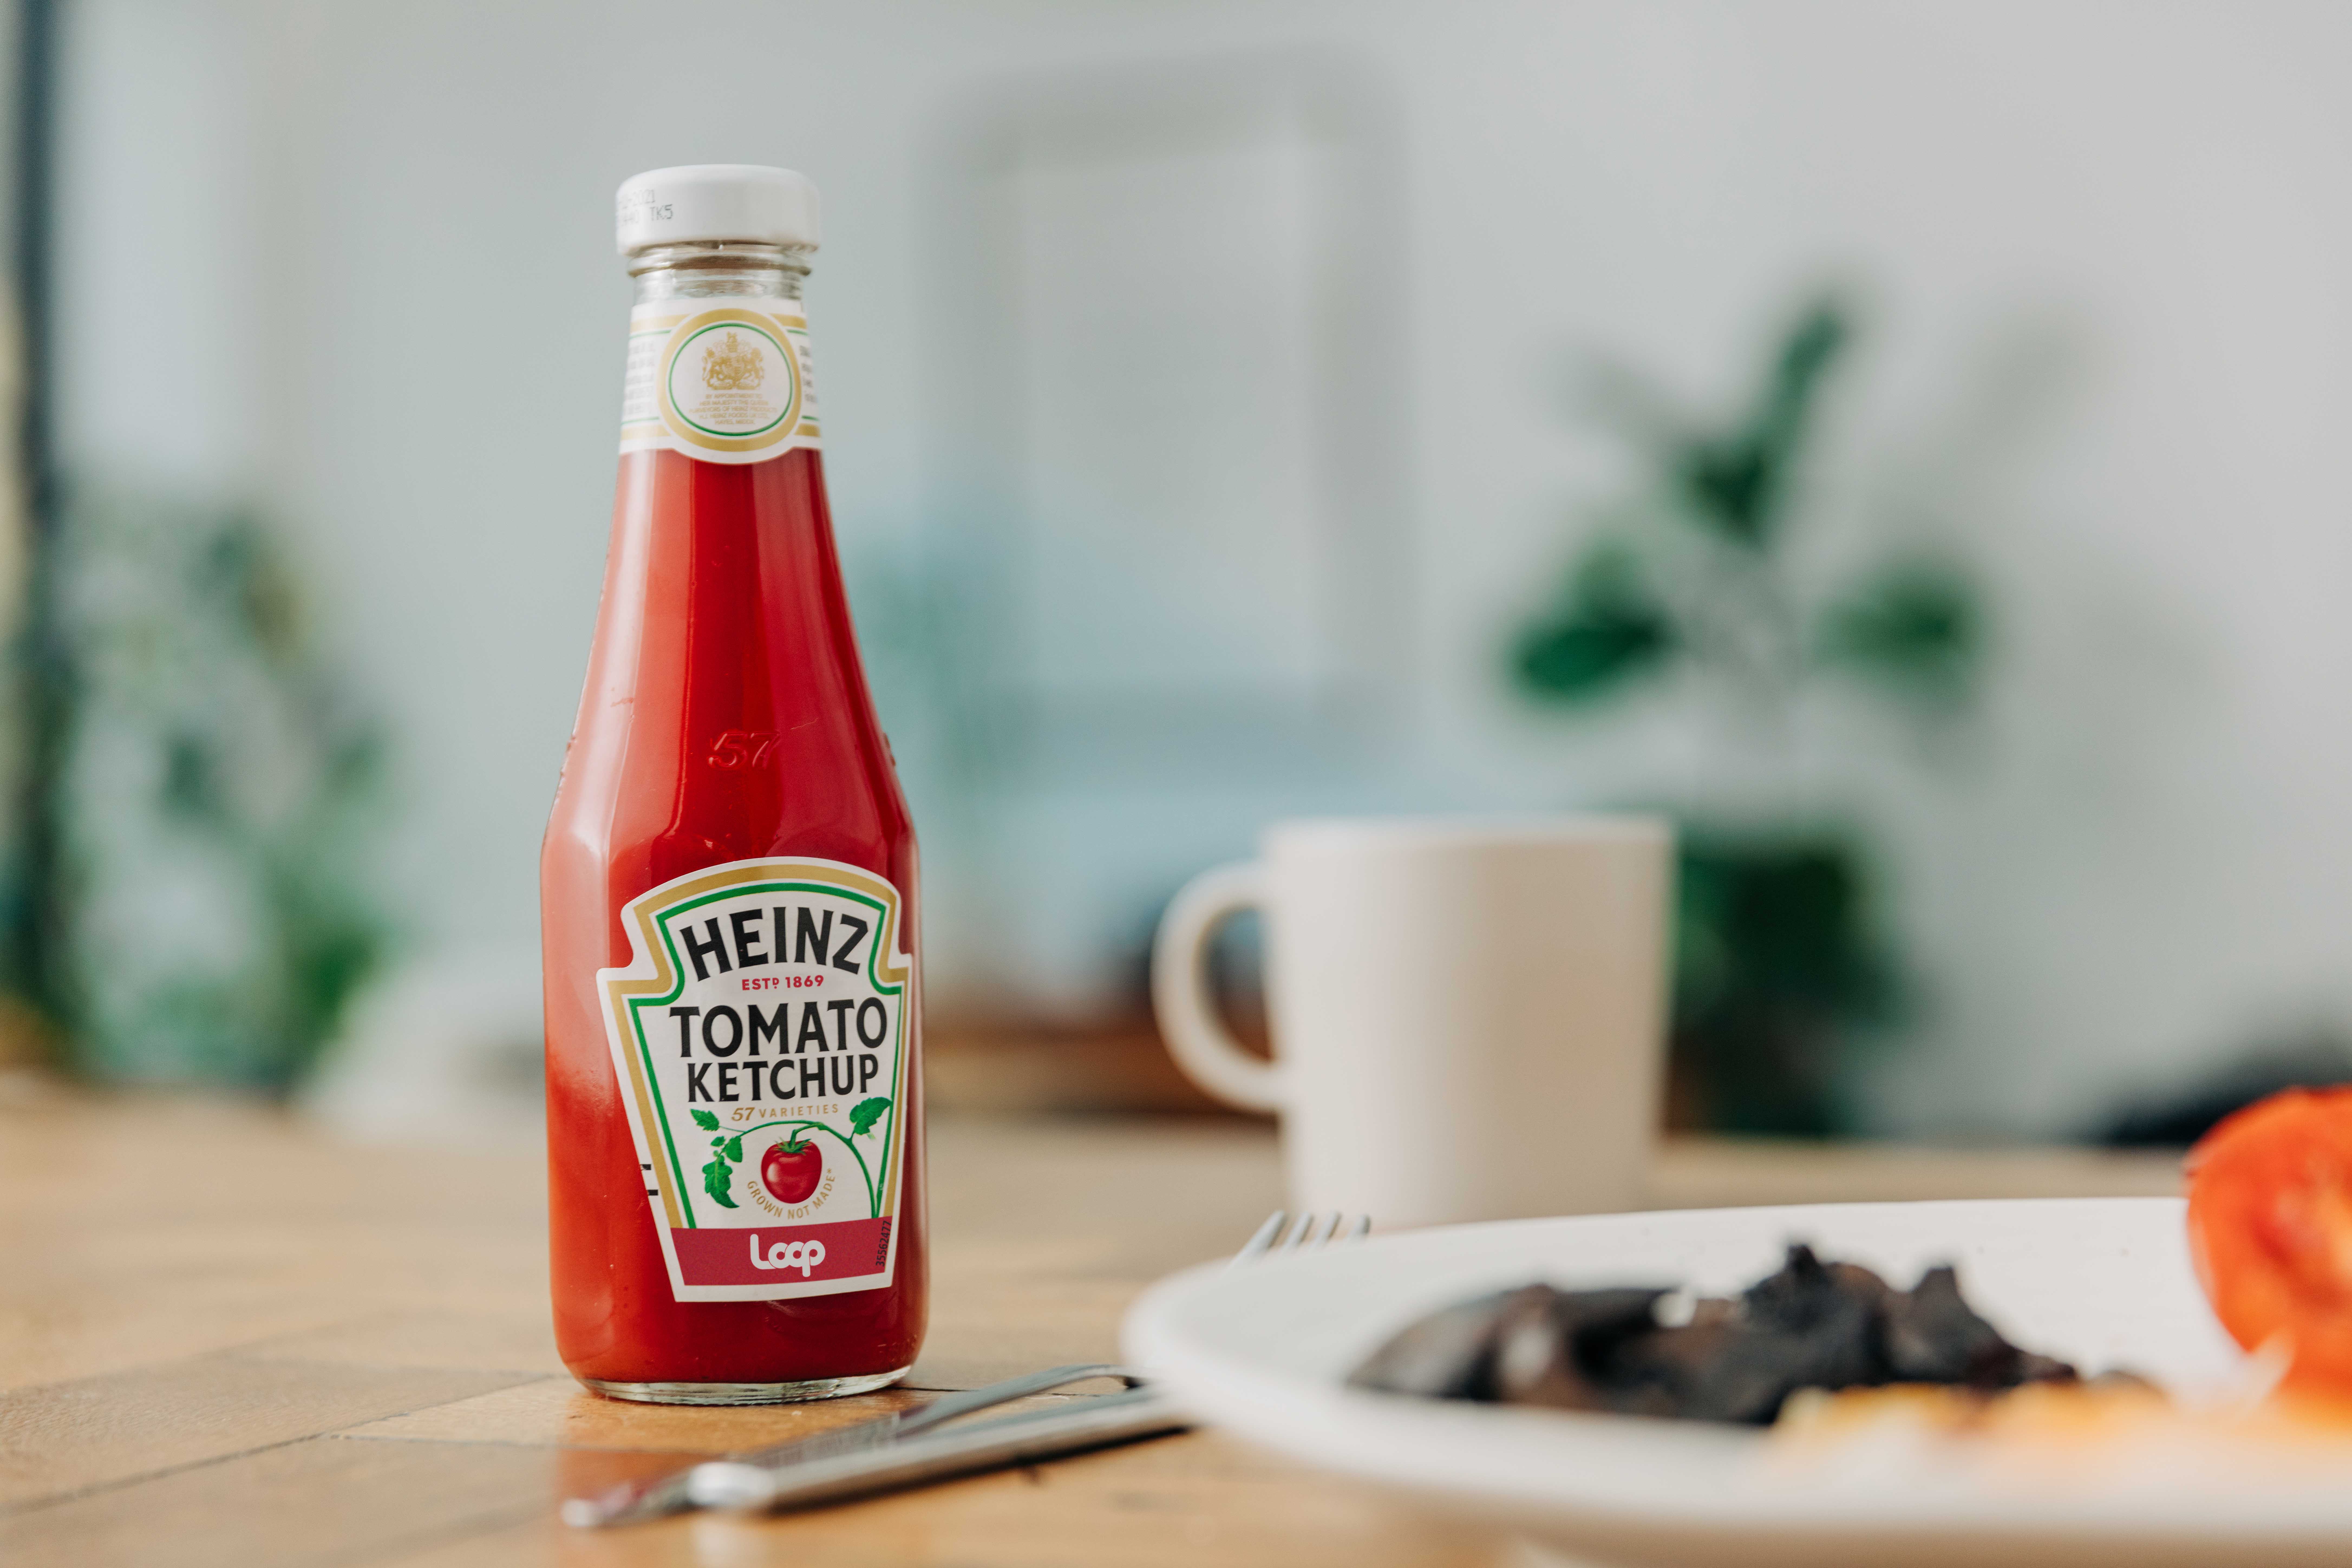 Heinz Tomato Ketchup is one of the brands involved in the scheme (Loop/PA)